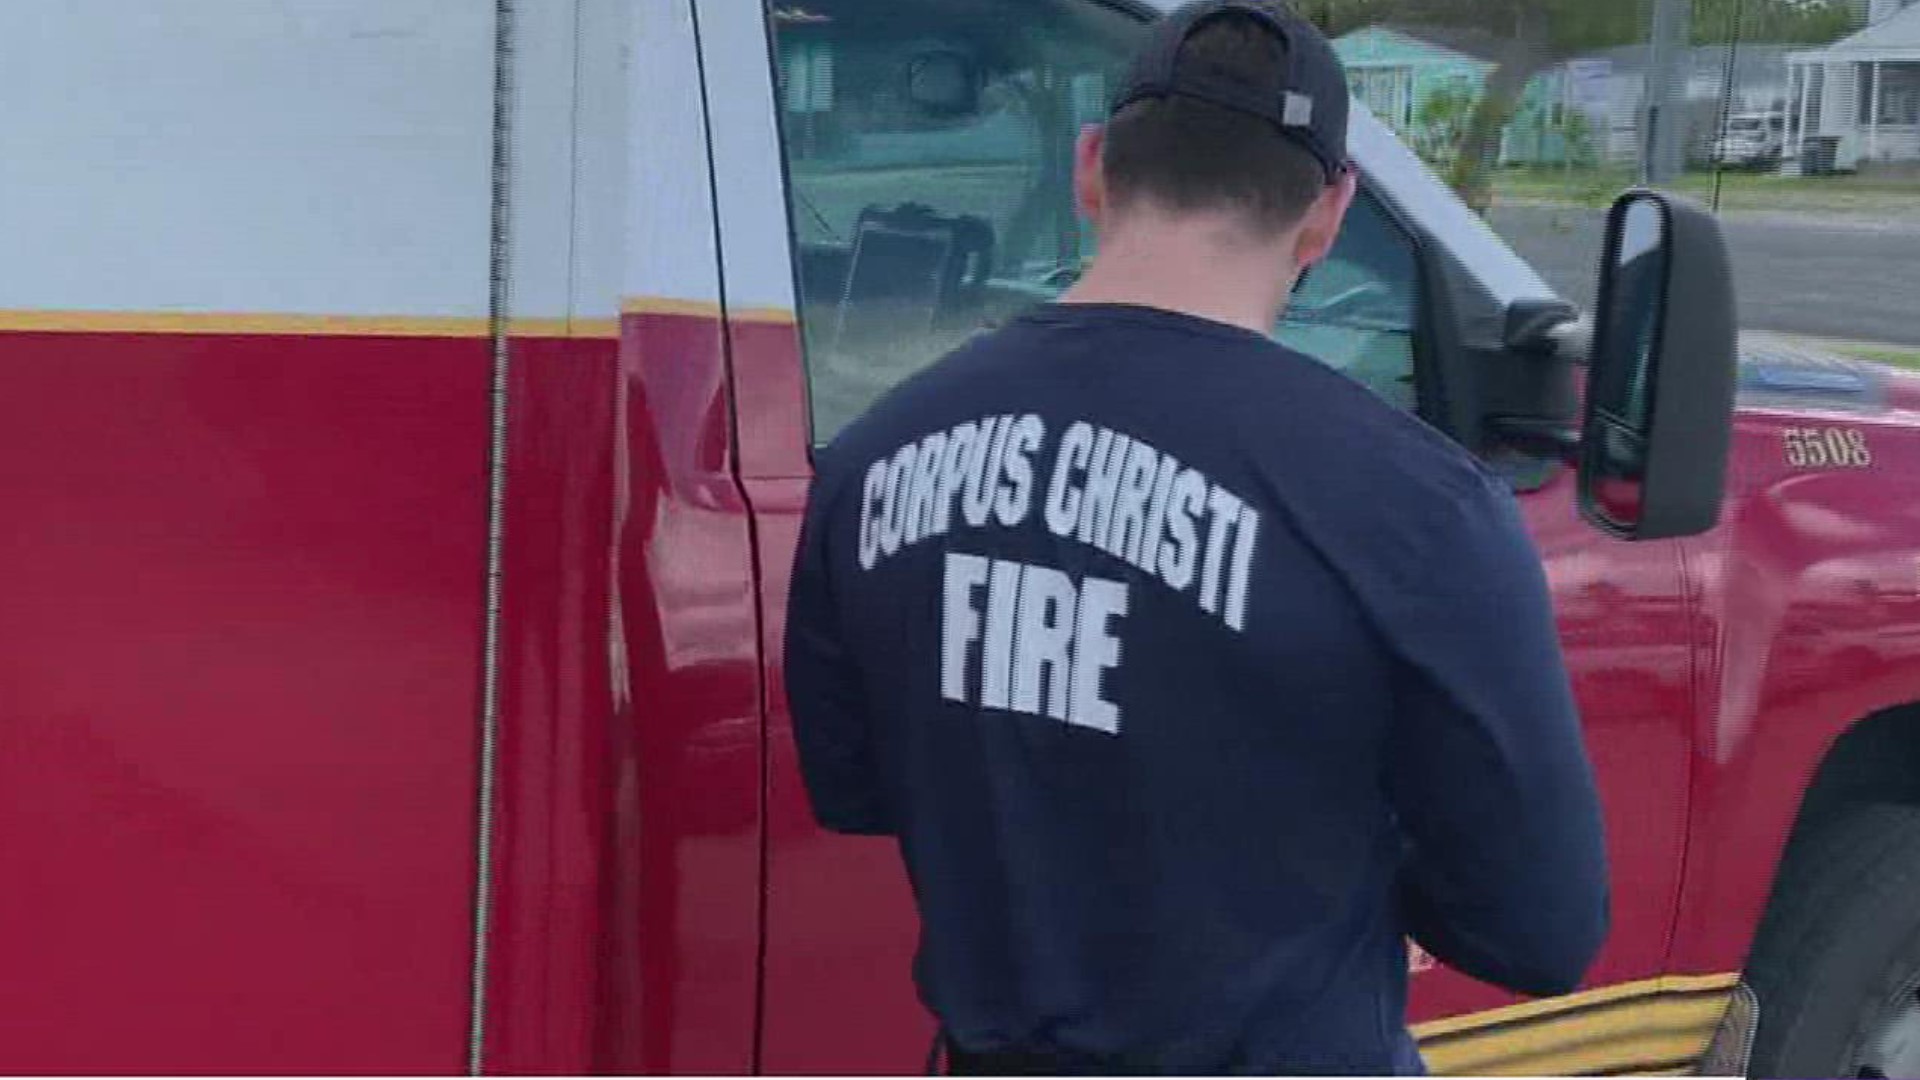 The CCFD said they were able to become fully staffed by hiring 175 cadets since 2019. The department will be looking to hire from a new pool of candidates in 2023.